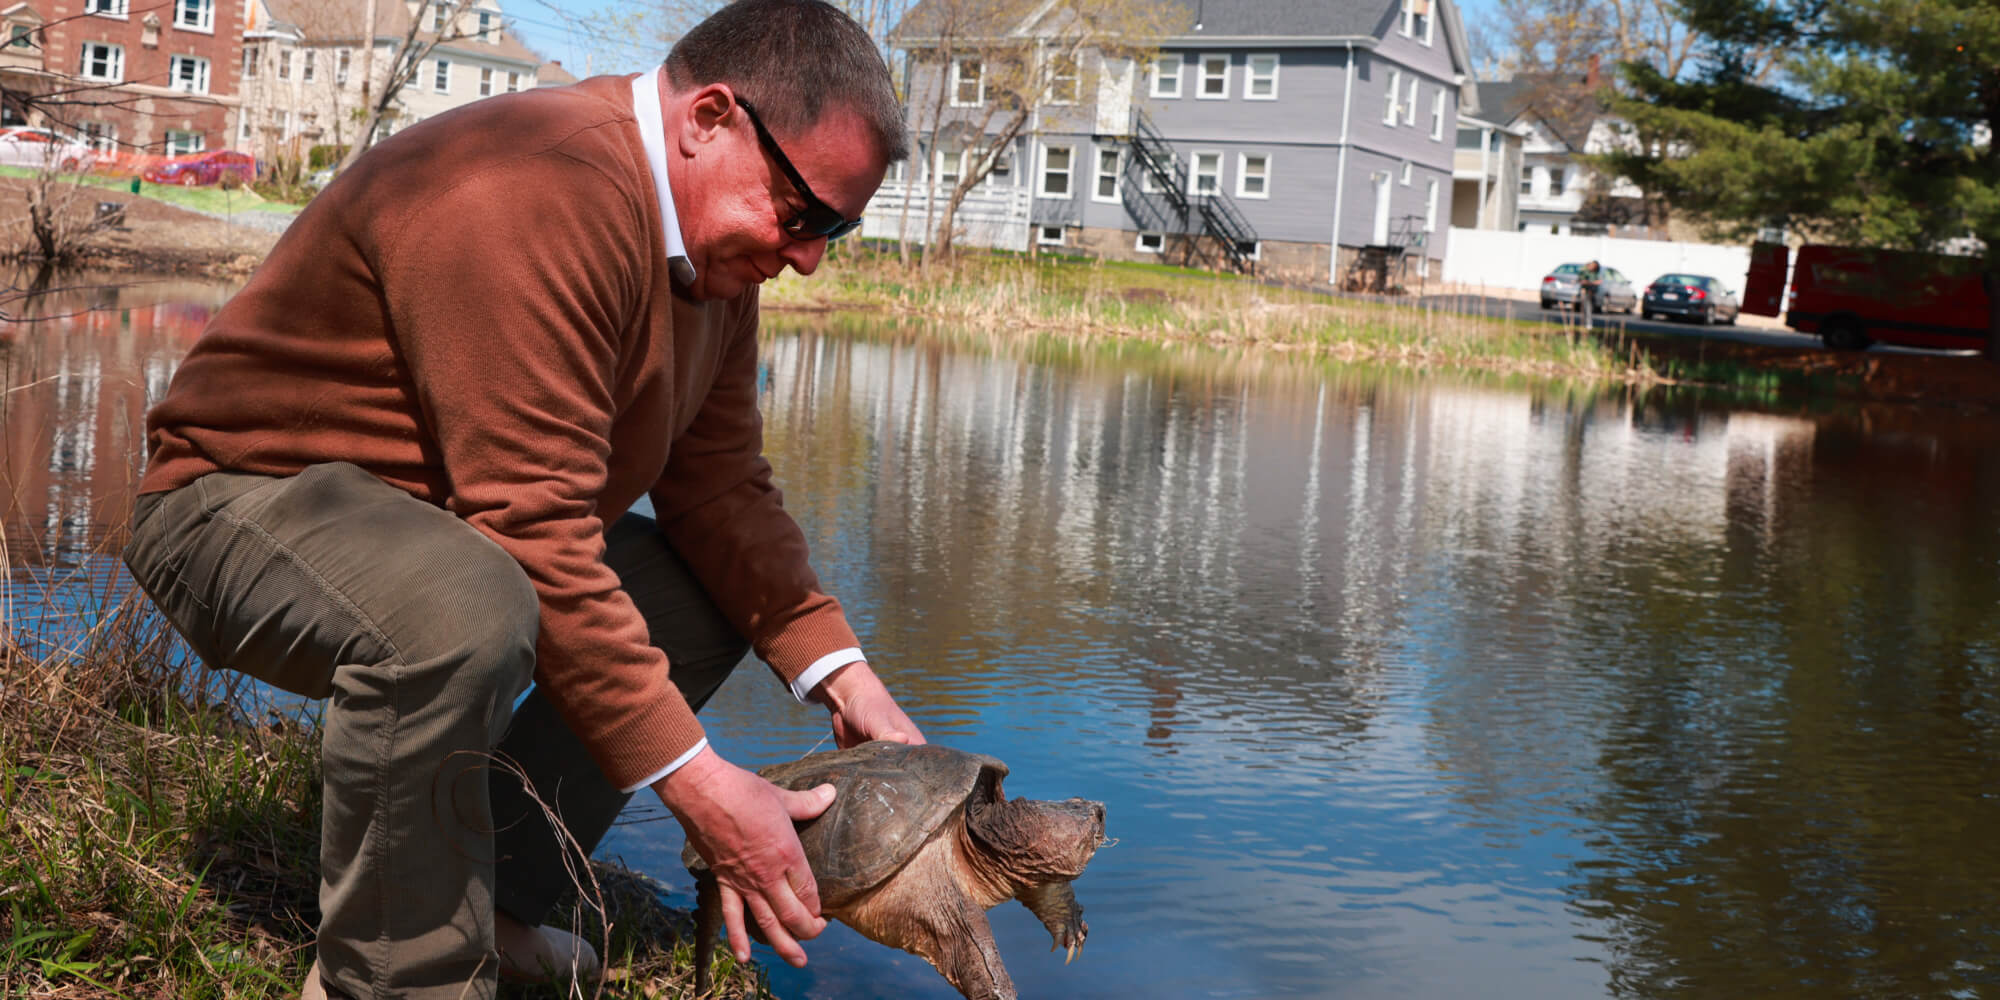 Mayor Tom Koch places a turtle back in pond in Quincy, Massachusetts